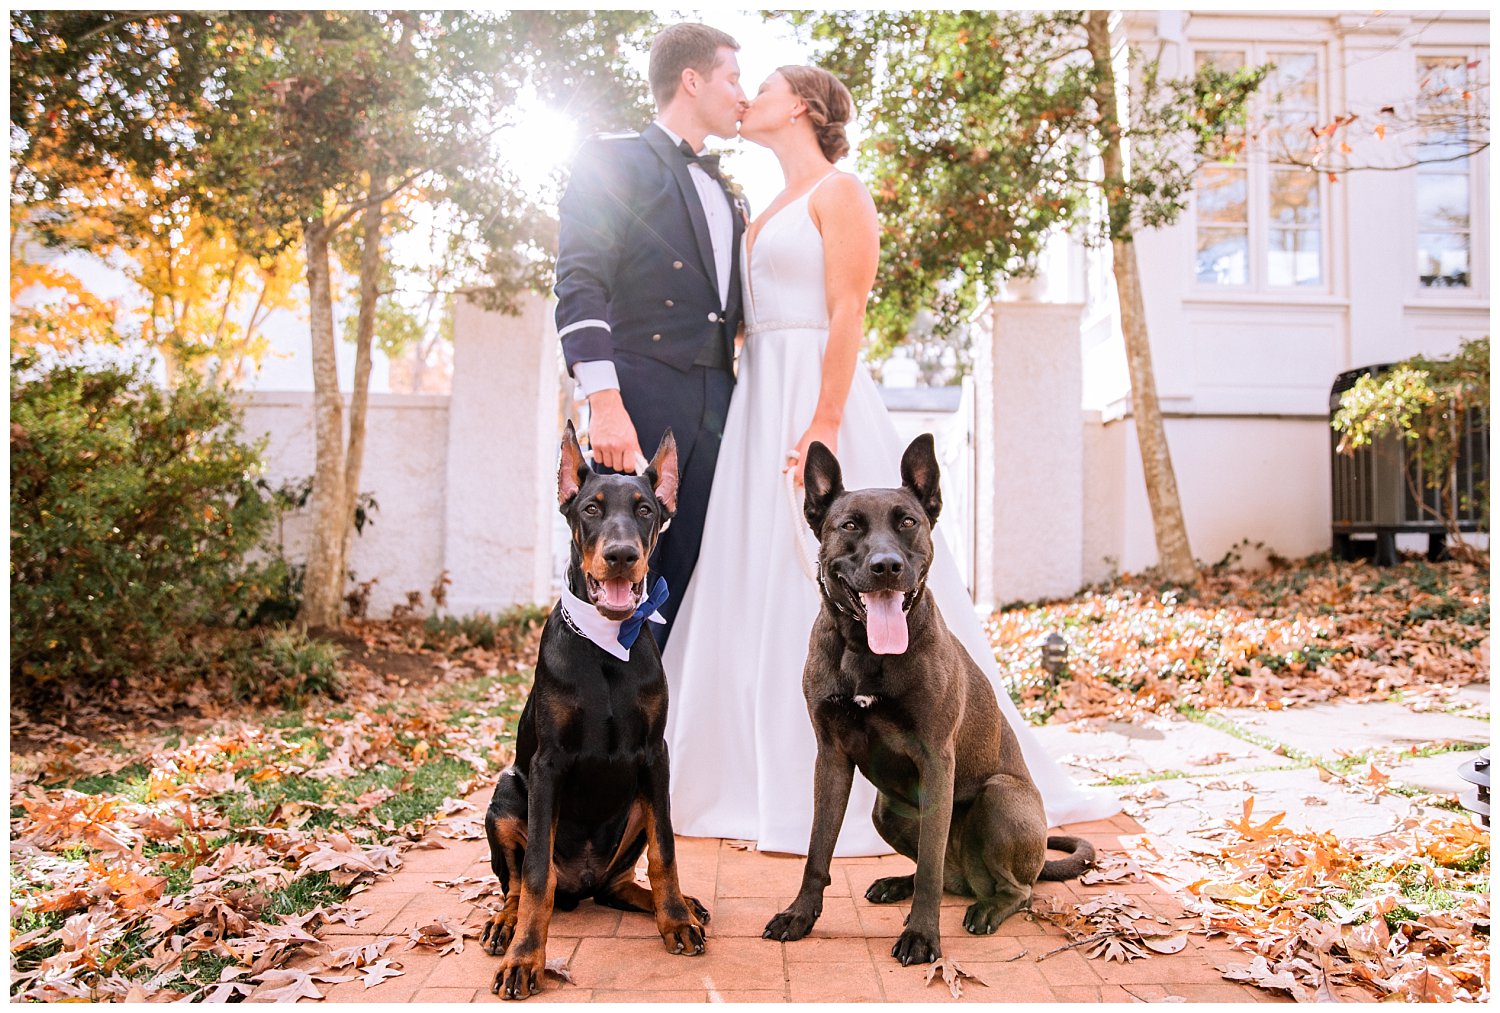 Bride & Groom portraits with their dogs at Keswick Vineyard Wedding photographed by Heather Dodge Photography